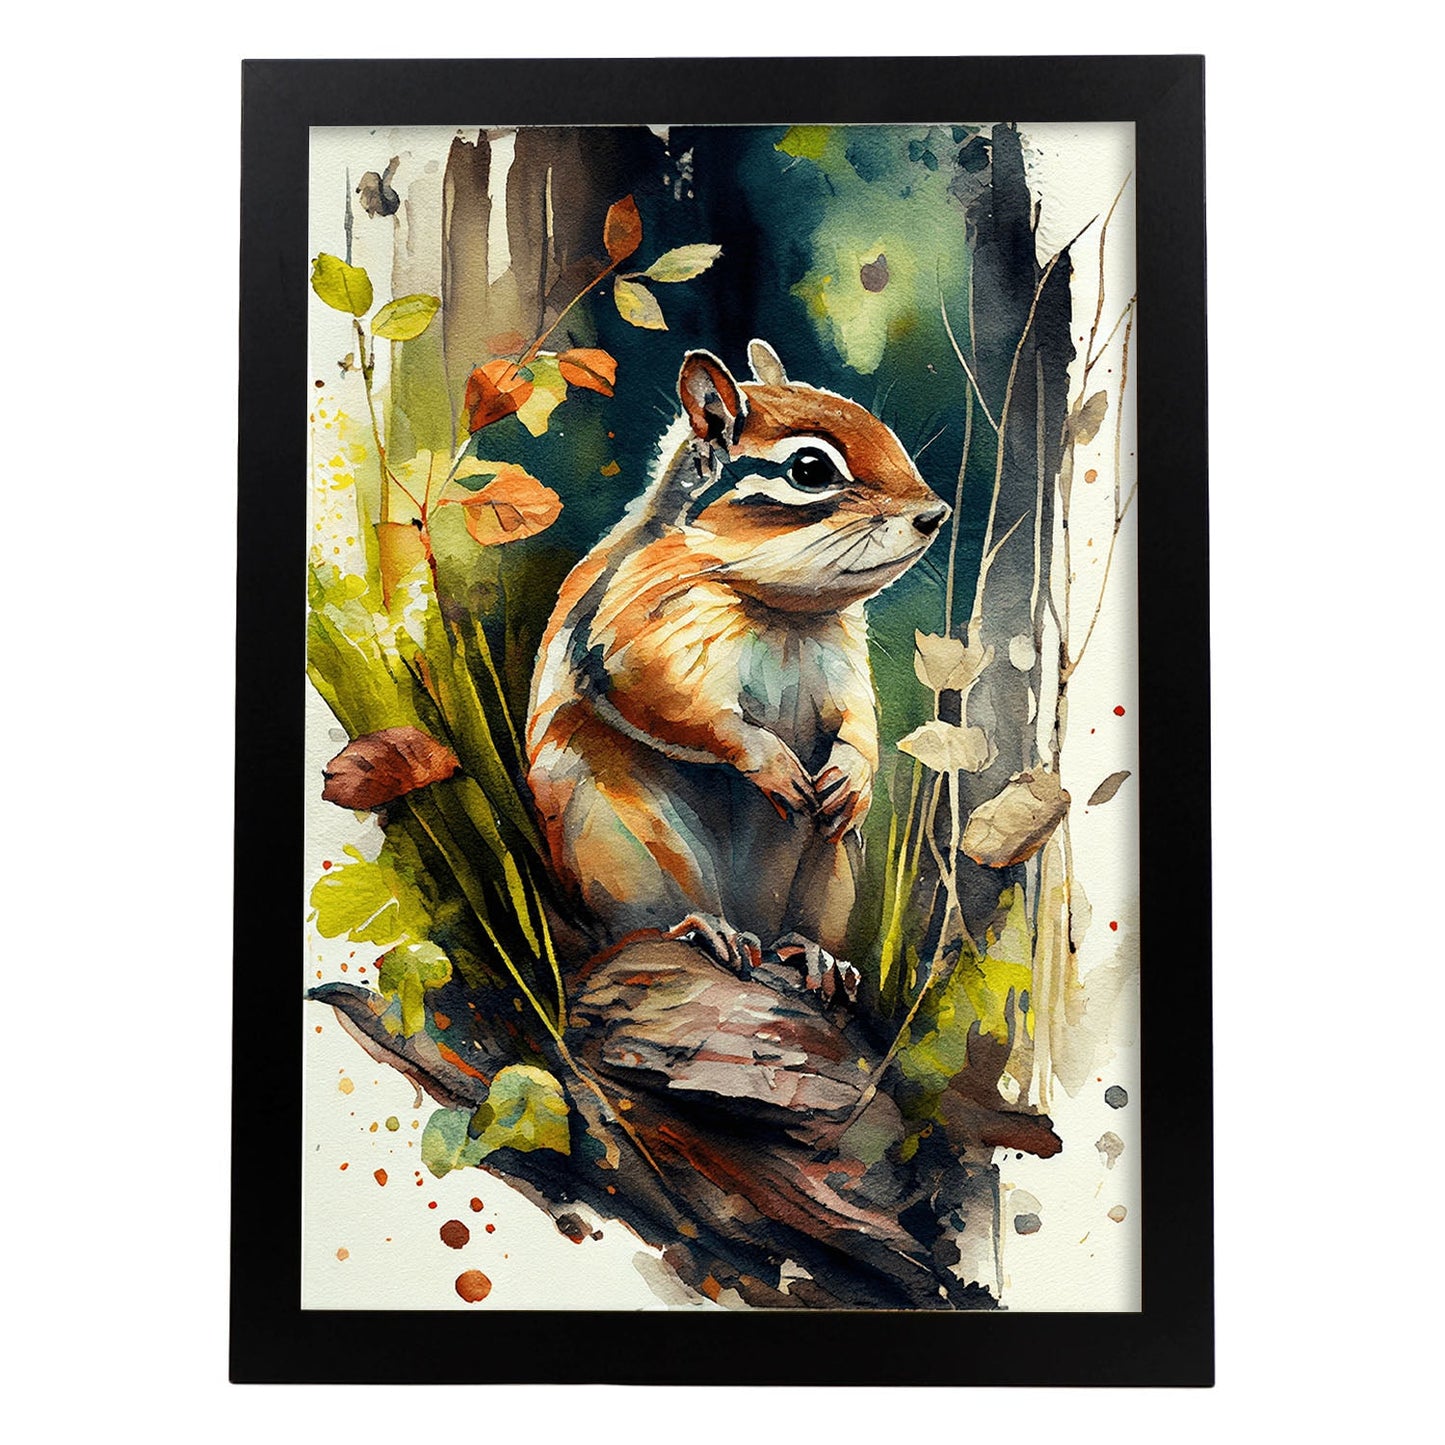 Nacnic Watercolor of Chipmunk in the forest. Aesthetic Wall Art Prints for Bedroom or Living Room Design.